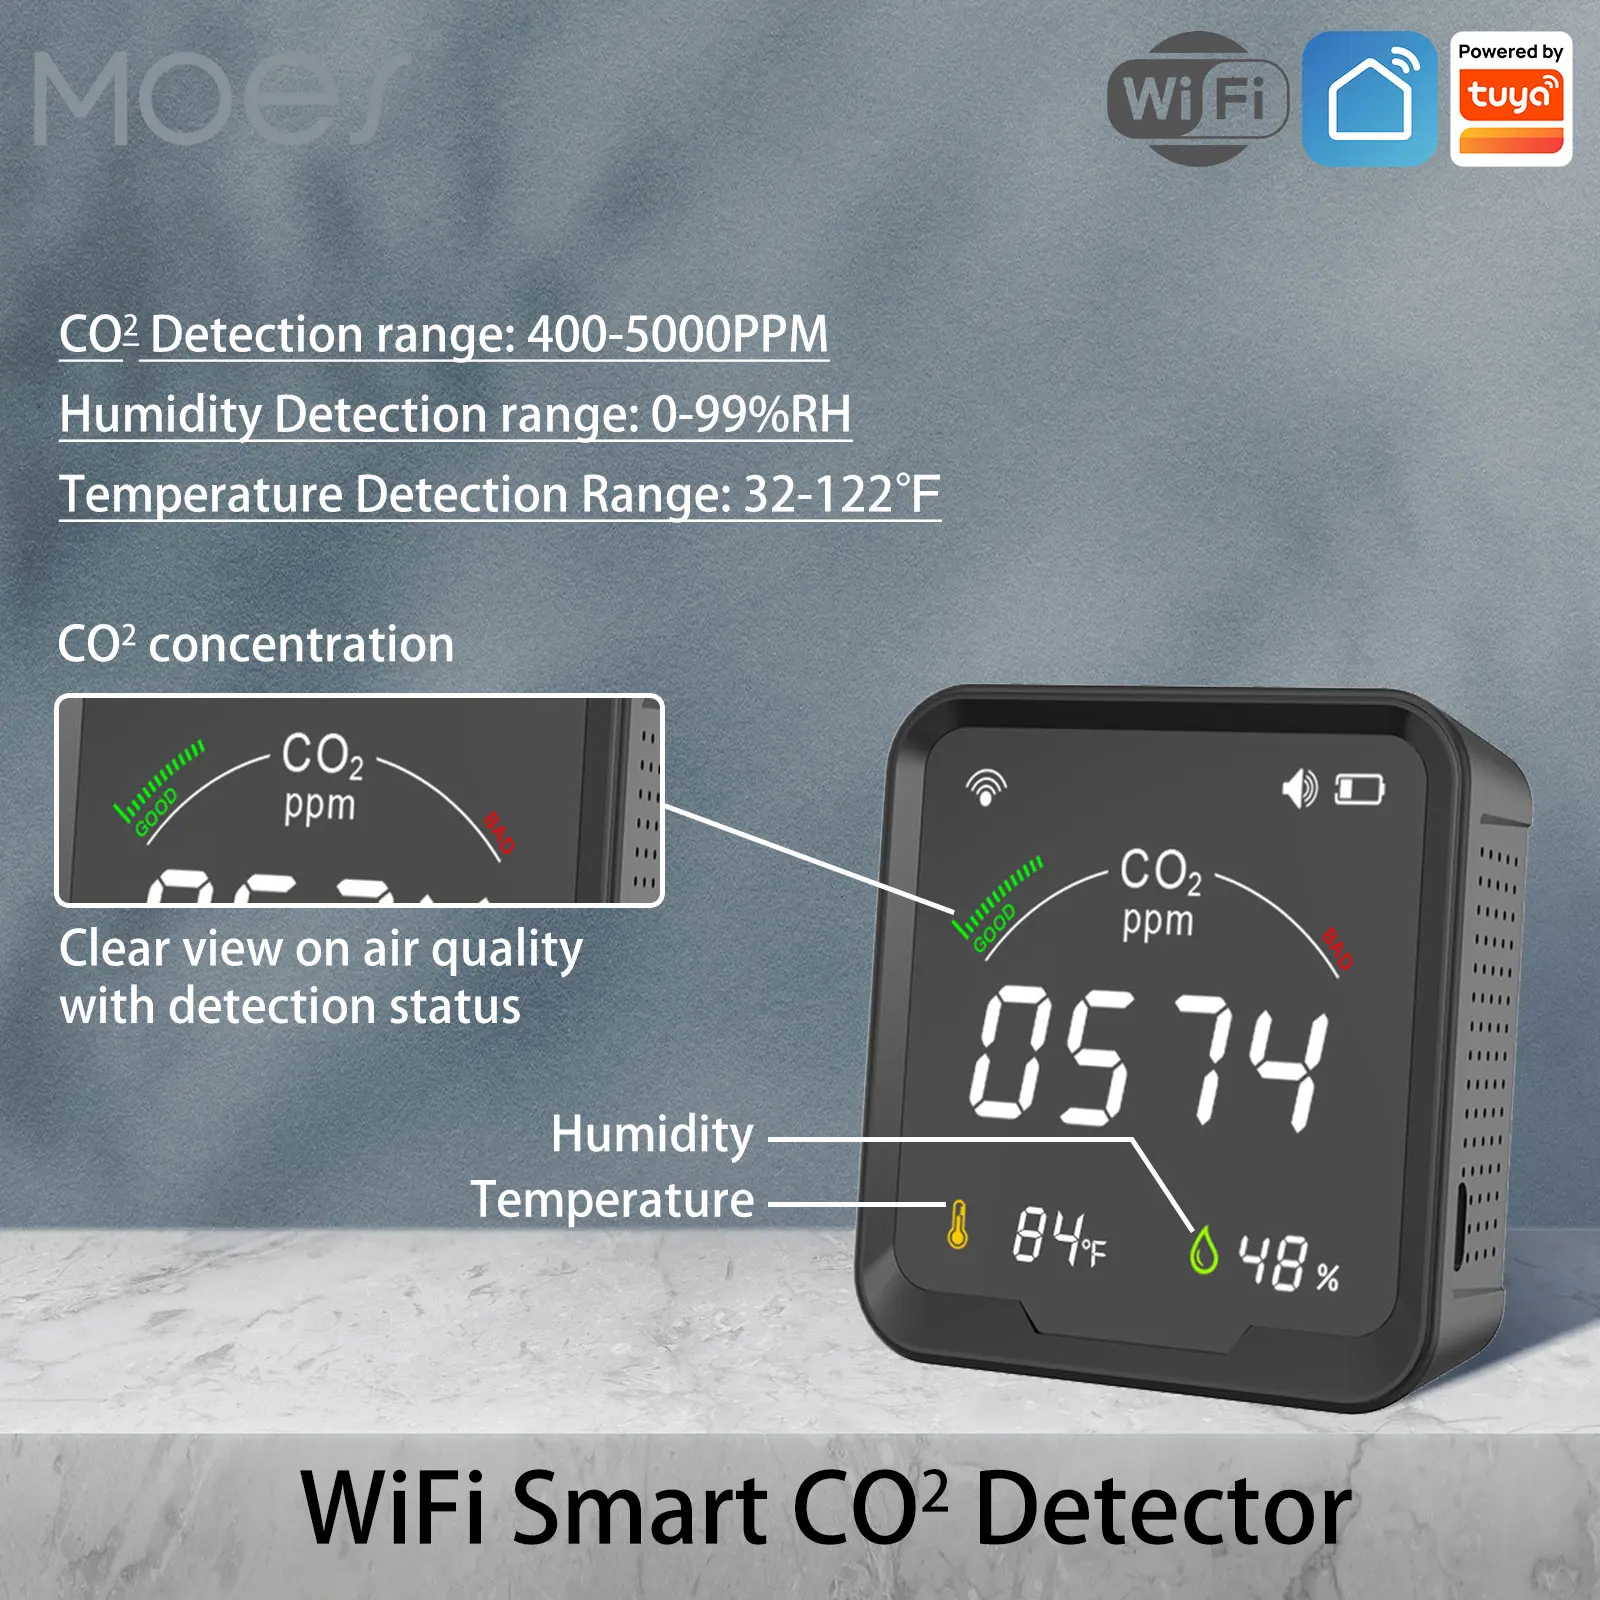 

Moes WiFi Tuya CO2 Detector 3 in 1 Carbon Dioxide Detector Air Quality Monitor Temperature Humidity Tester smart alarm senor